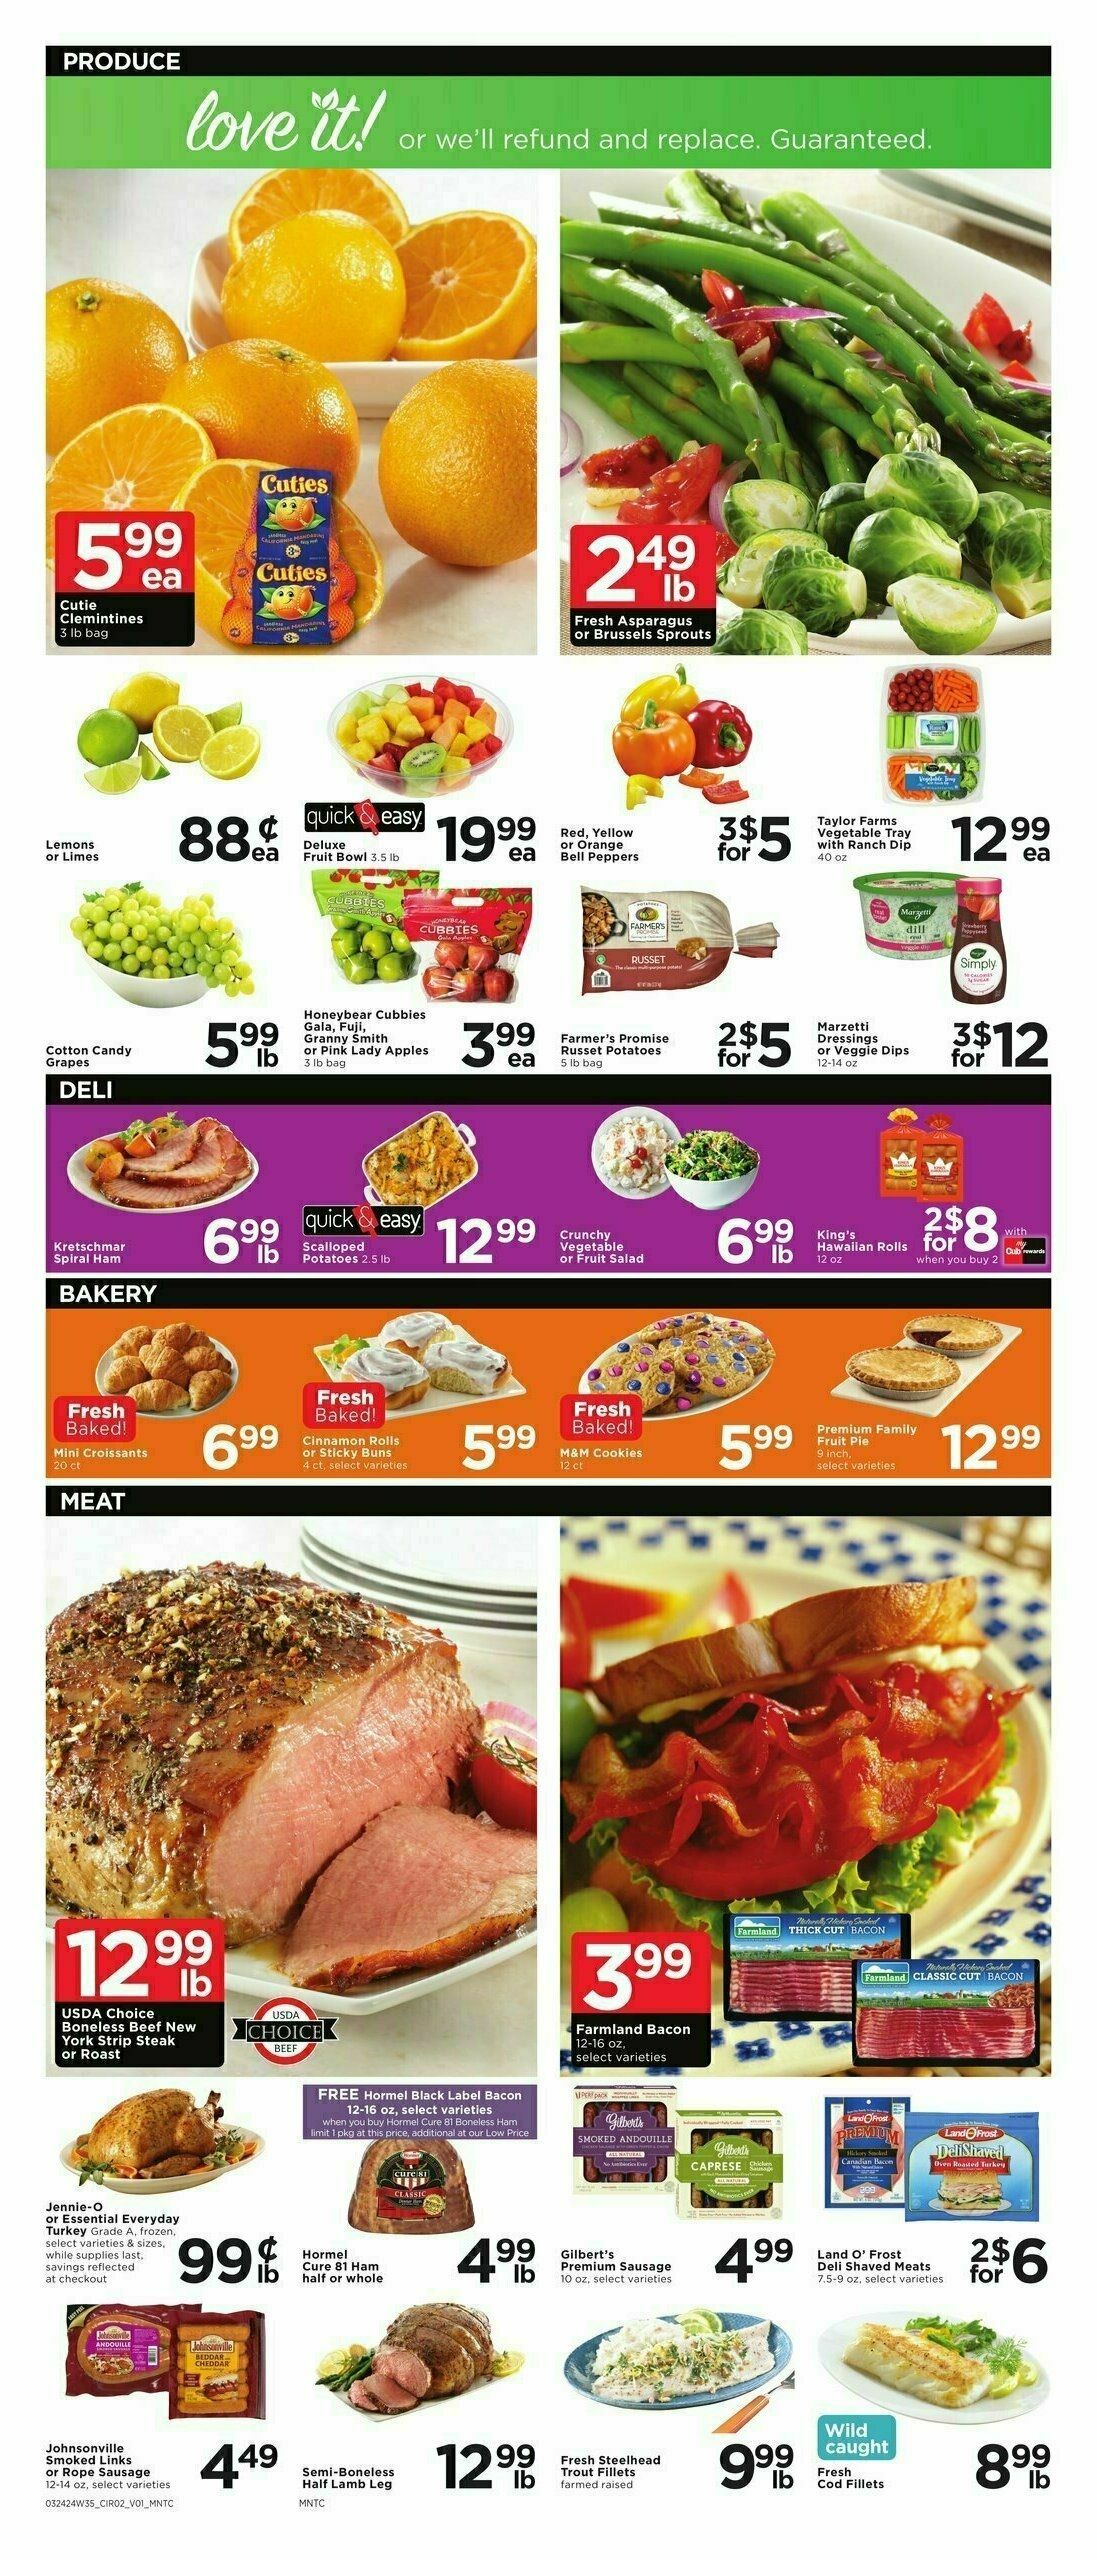 Cub Foods Weekly Ad from March 24